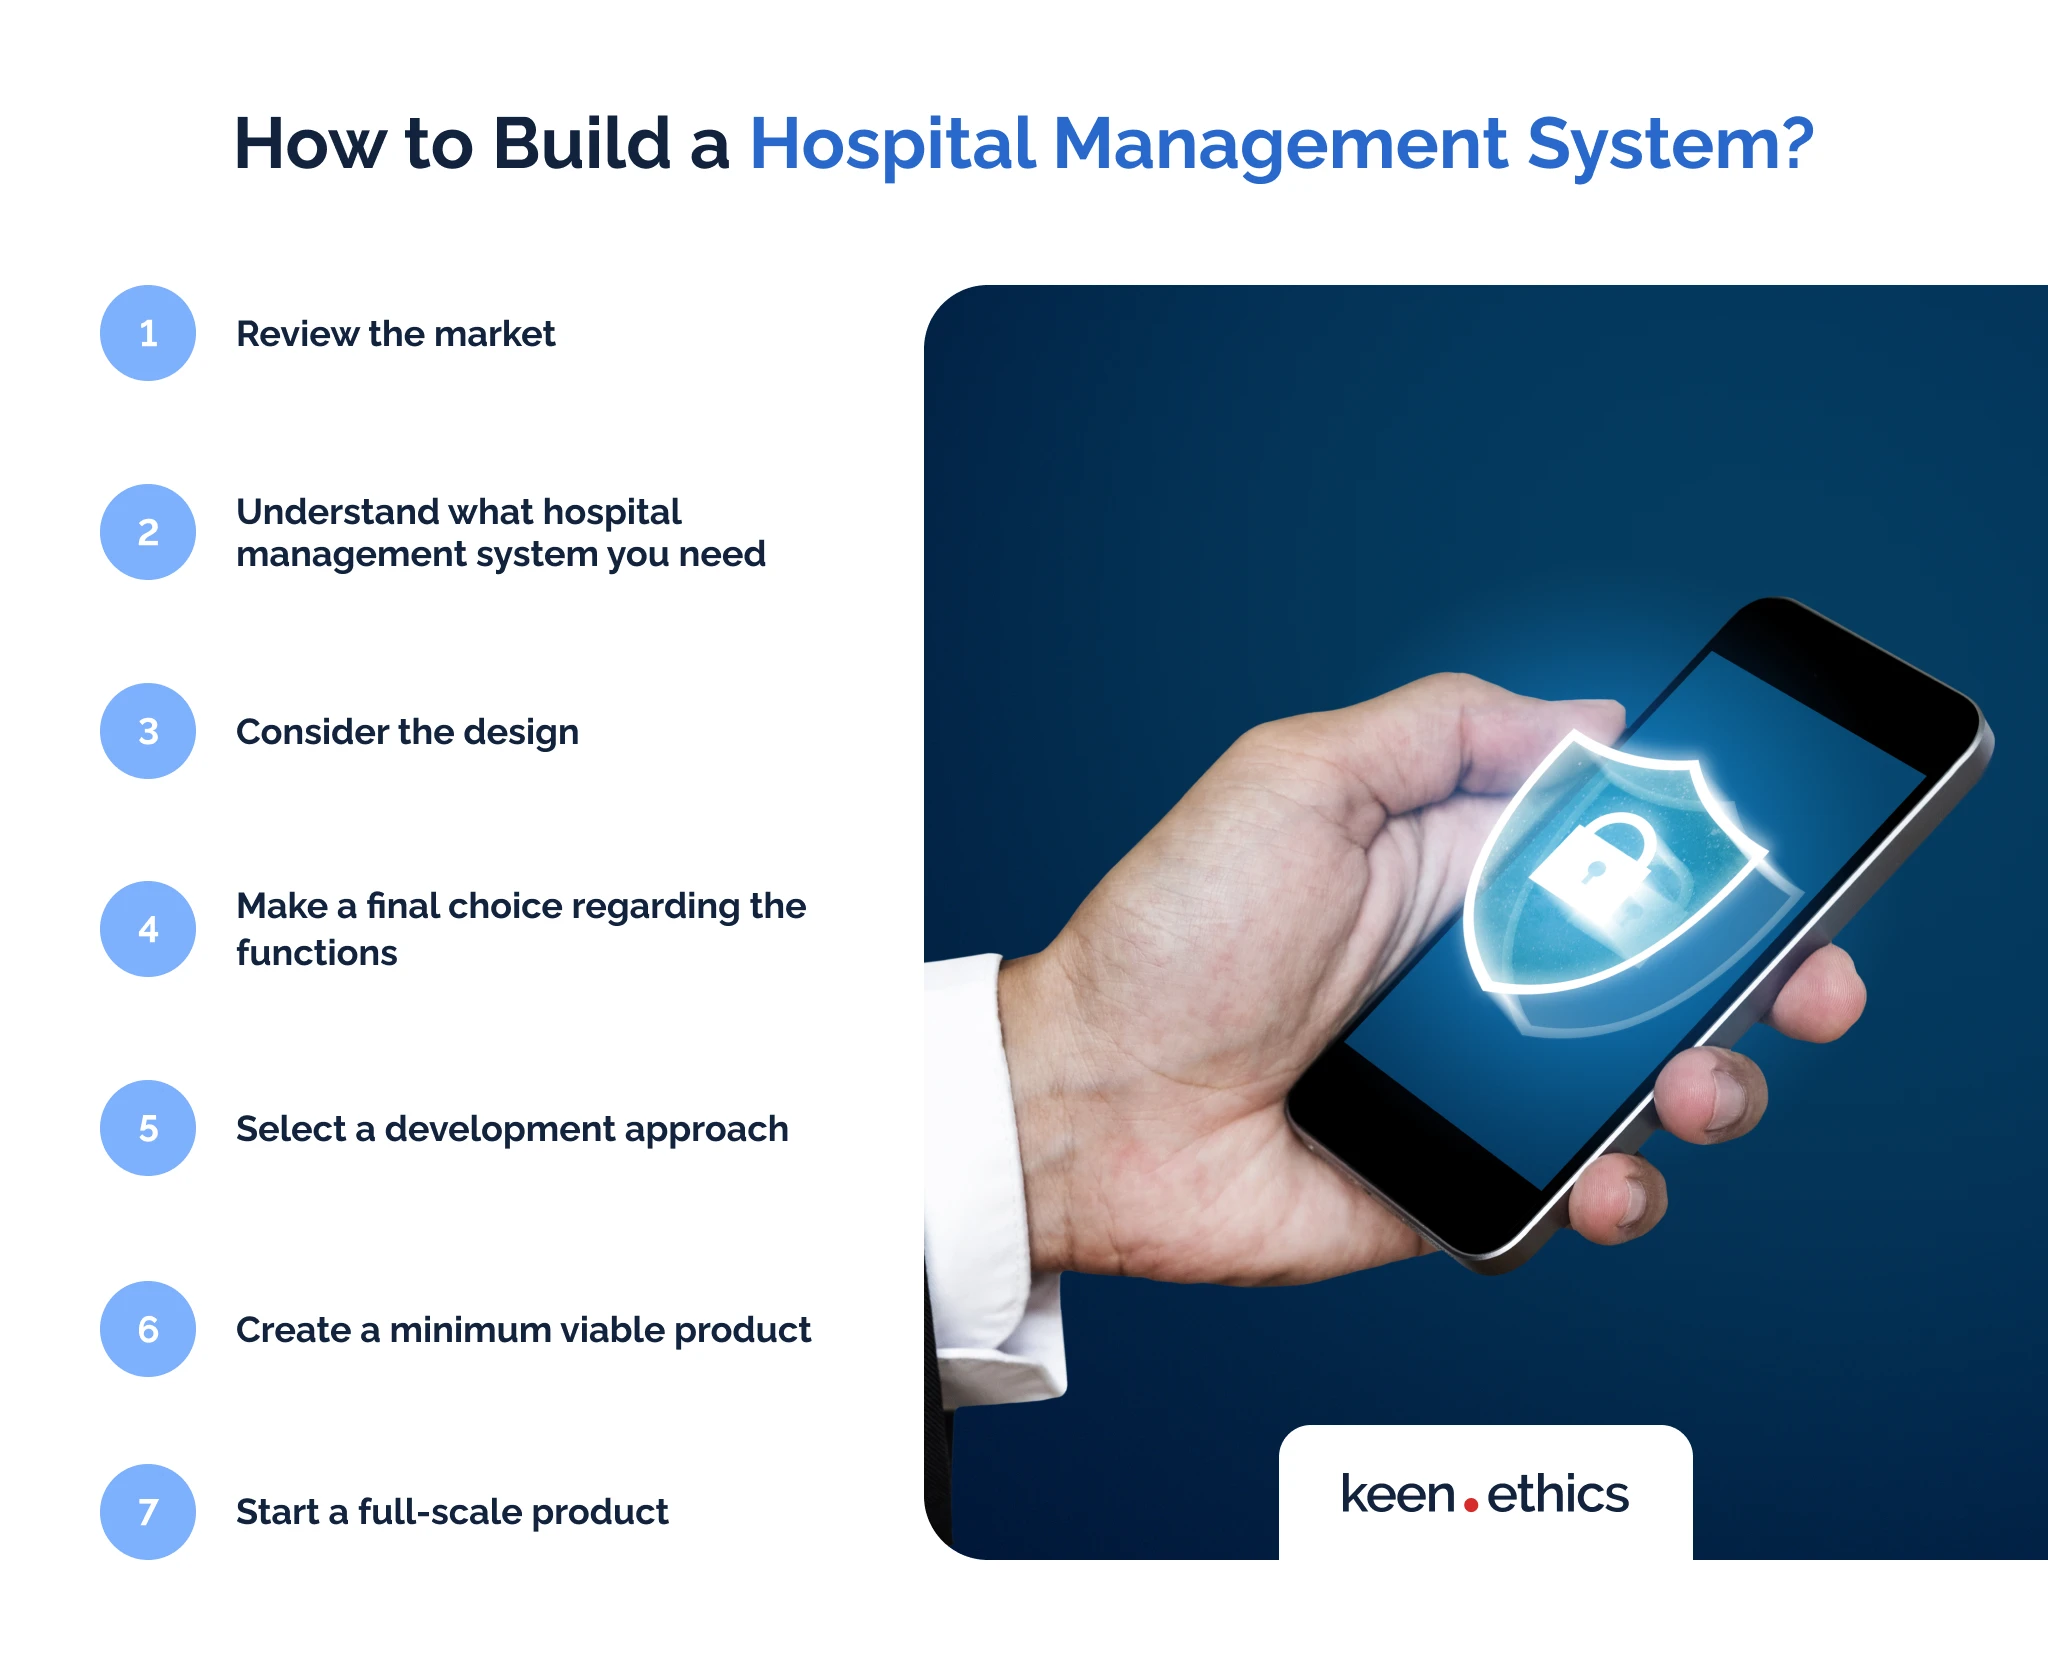 How to build a hospital management system?